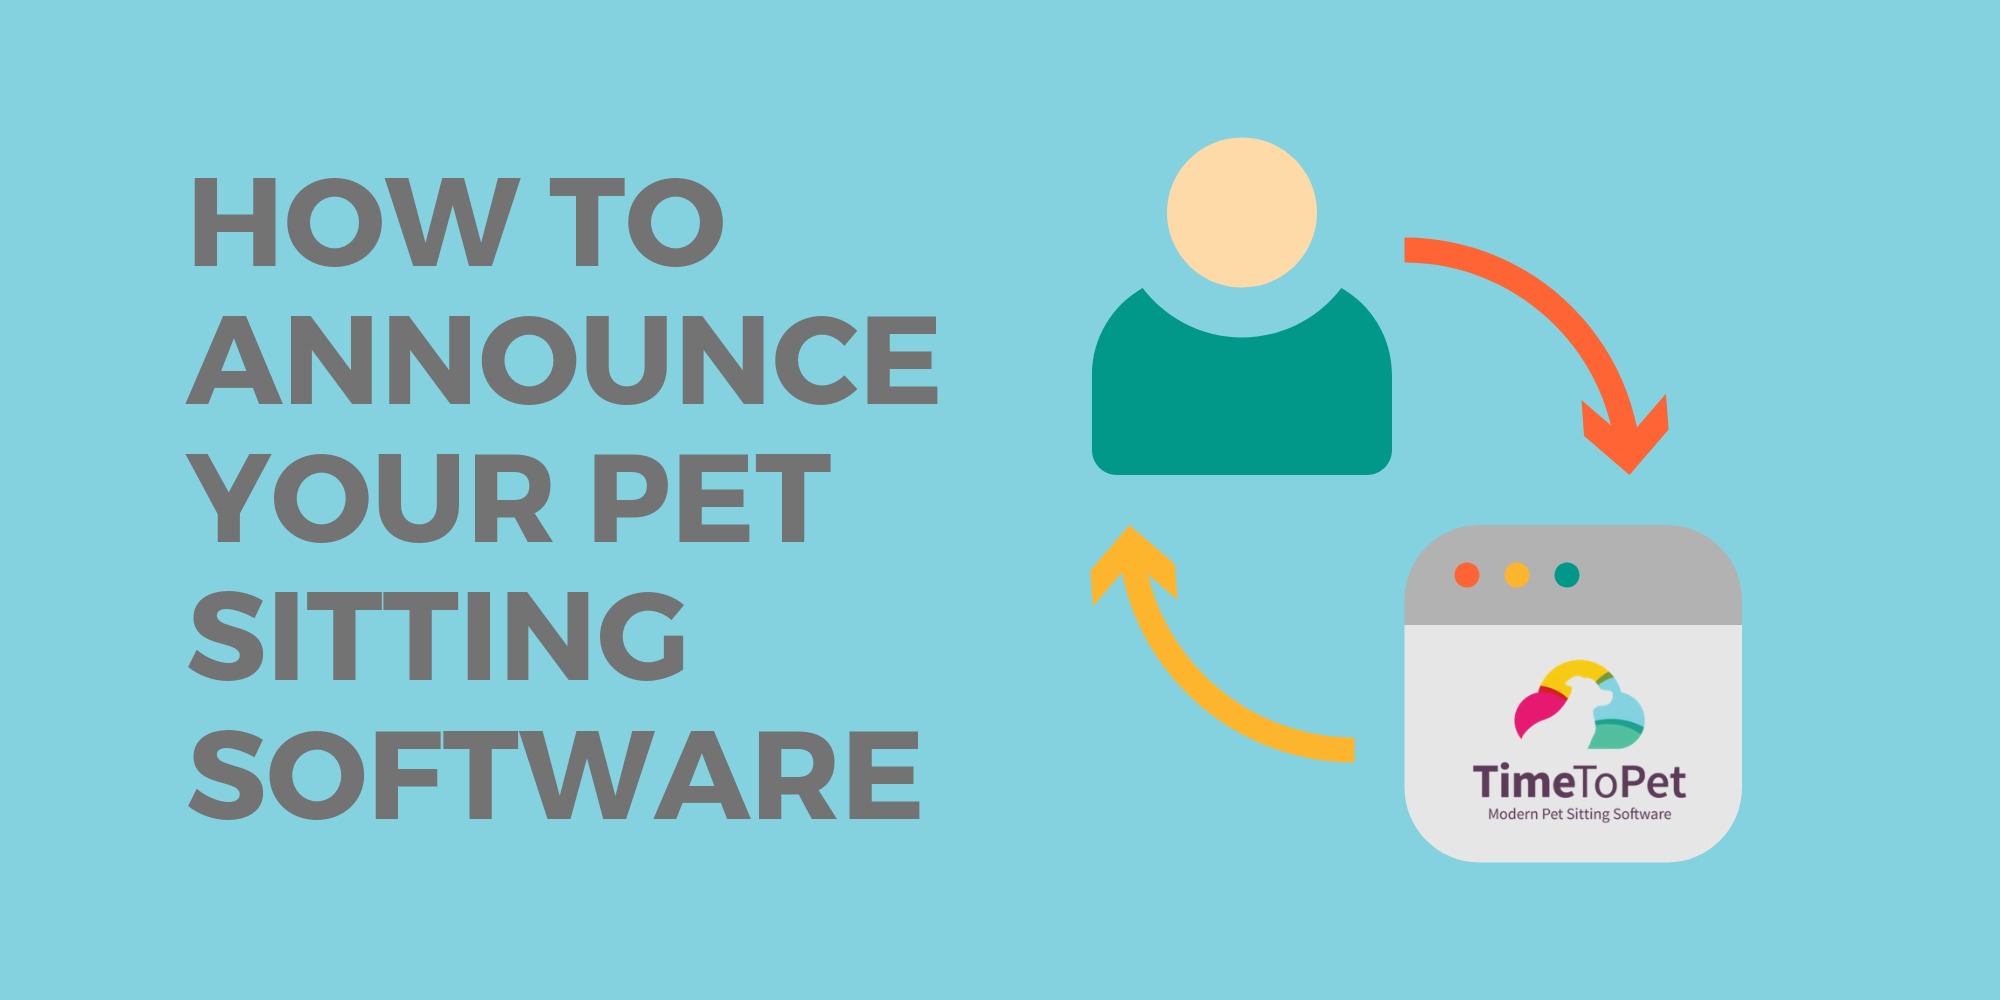 How-to-Announce-Your-Pet-Sitting-Software.png